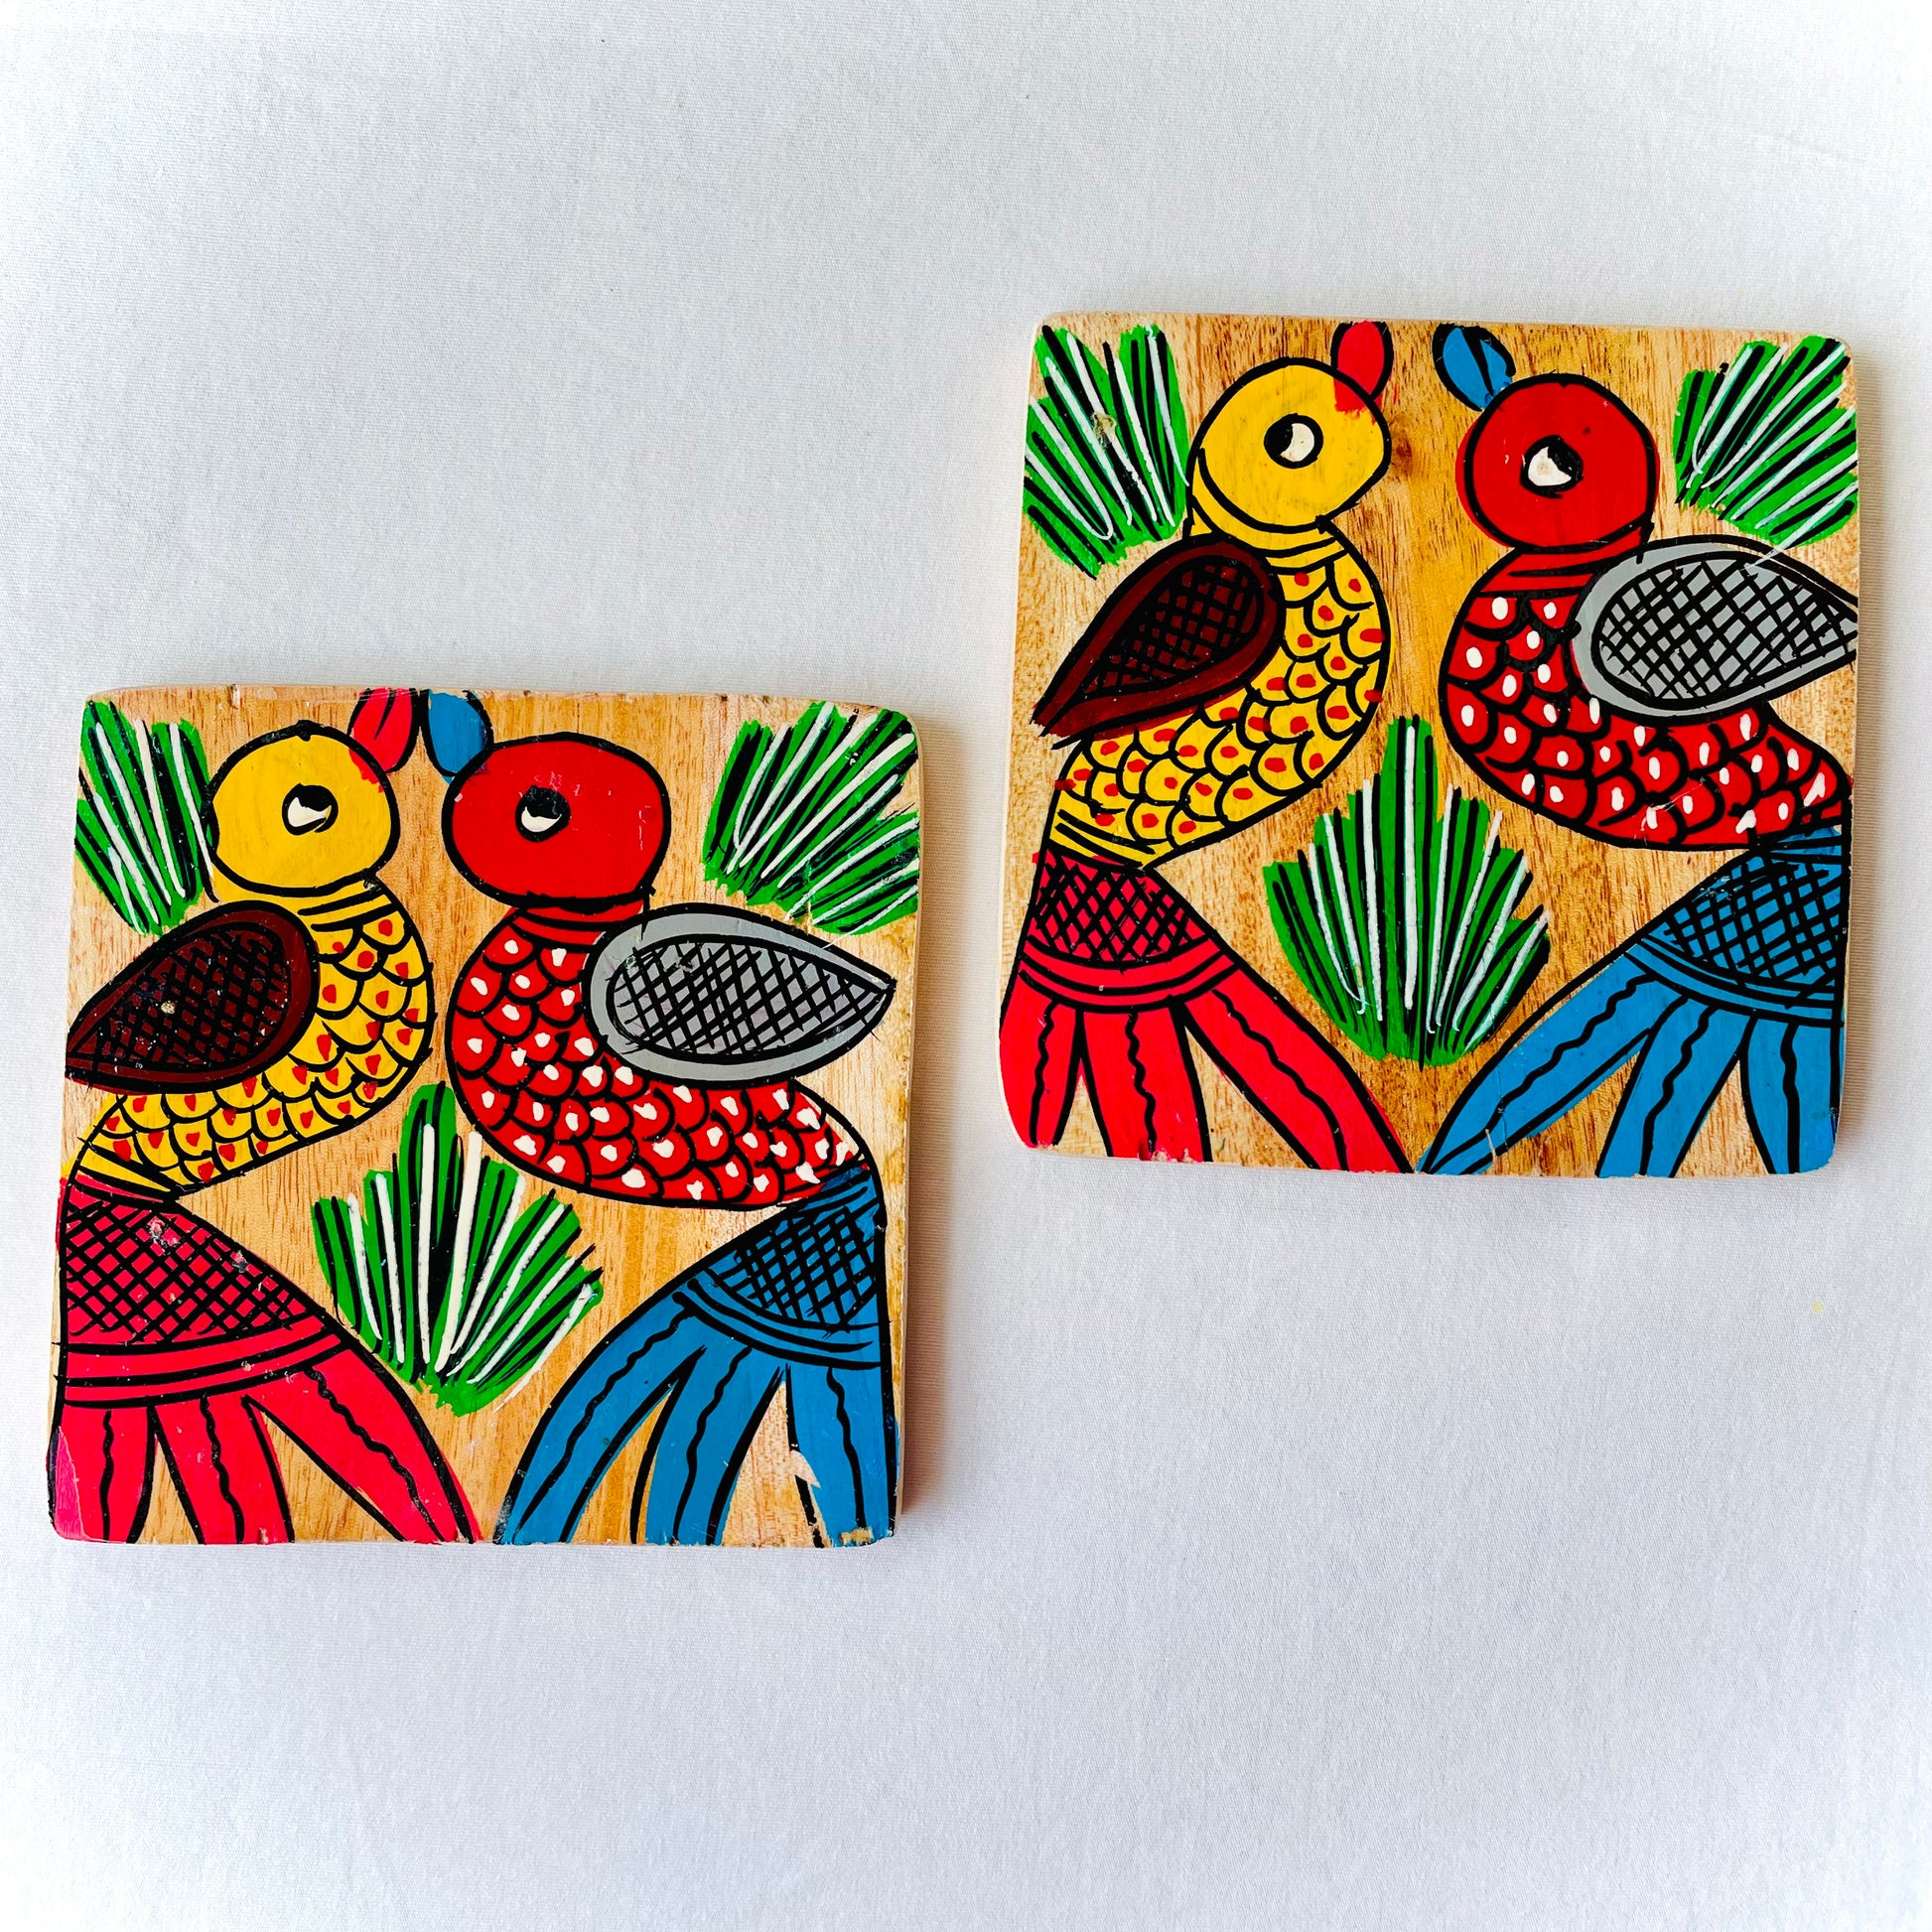 Two square wood coasters displayed against a white background, feature one yellow bird with red feathers and a beak and one red with blue feathers and a beak along with some leaves in each wood coaster